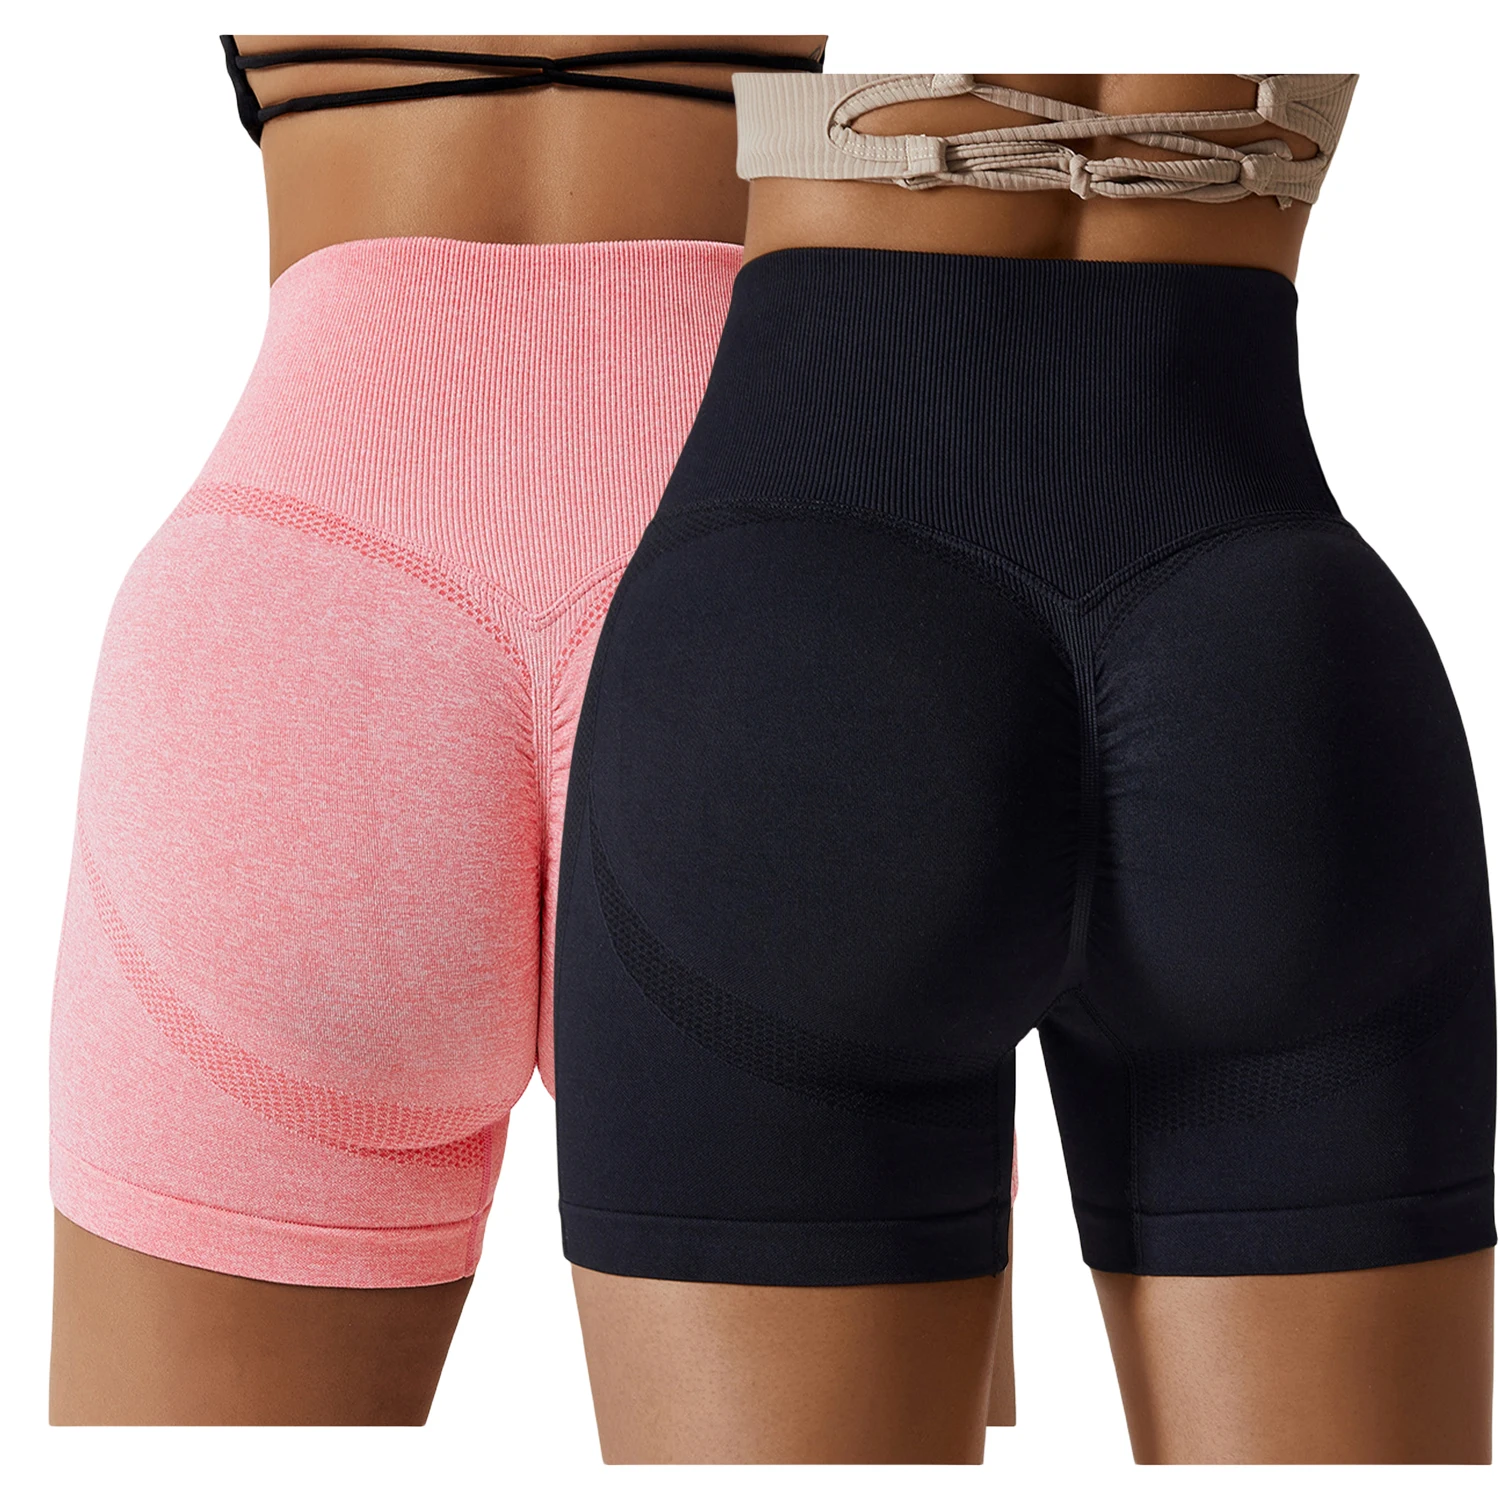 Lulu Seamless Sports Gym Shorts High Waist Summer Push Up Short Leggings For Bicycling Ladies Slimming Fitness Workout Shorts